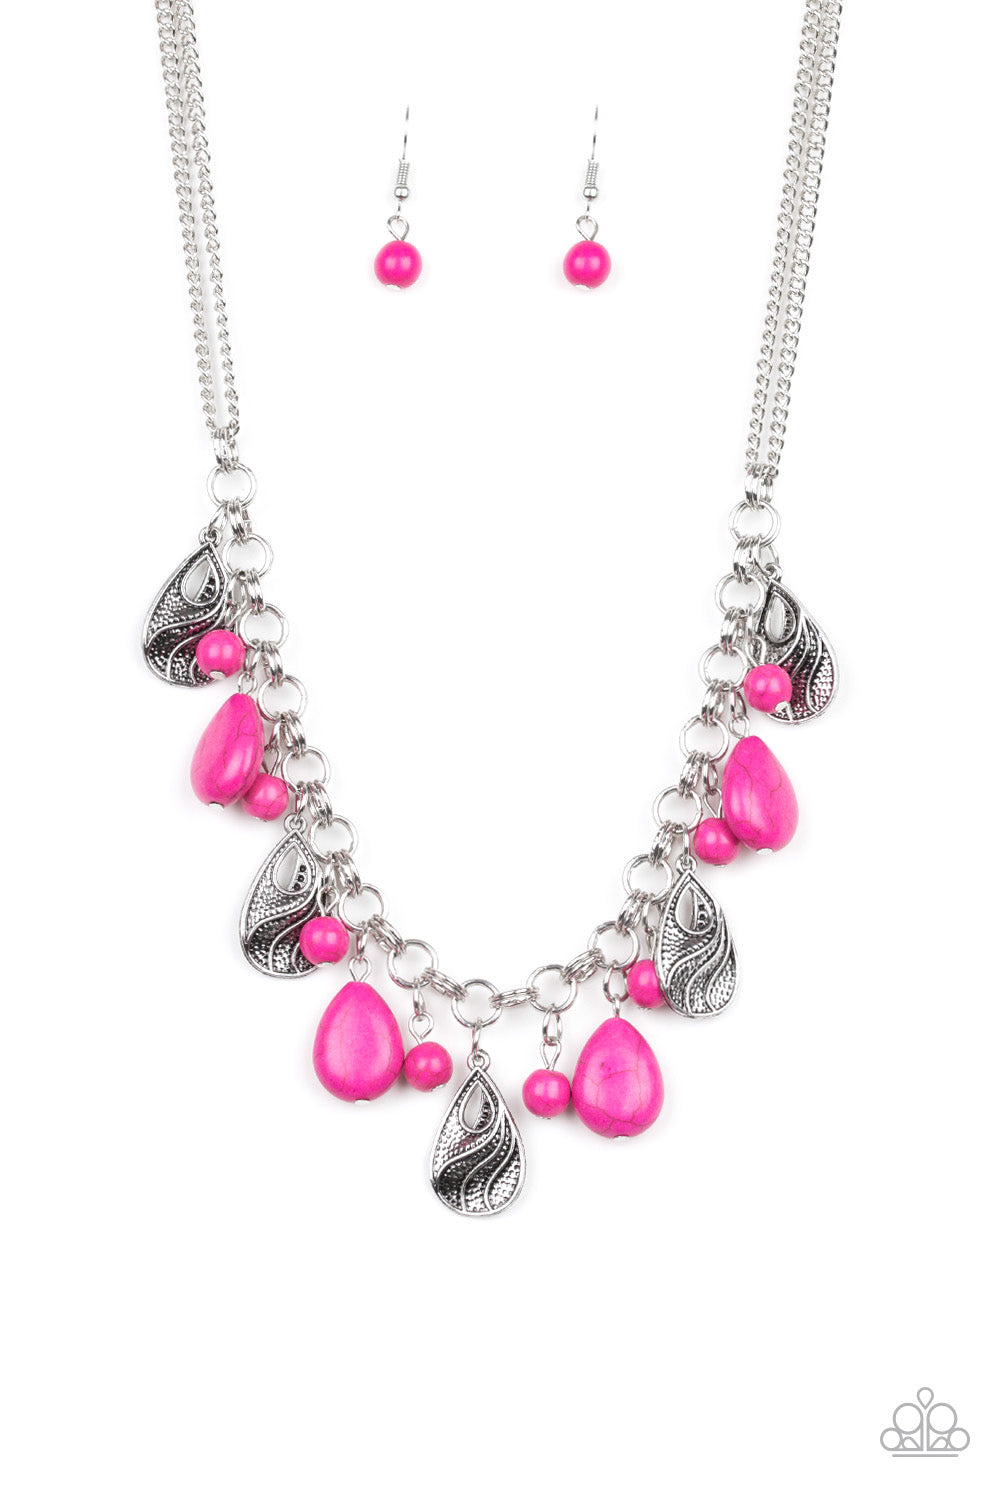 A collection of round and teardrop pink beads and decorative silver teardrops swing from the bottom of double-link silver chain, creating a vivacious fringe below the collar. Features an adjustable clasp closure.